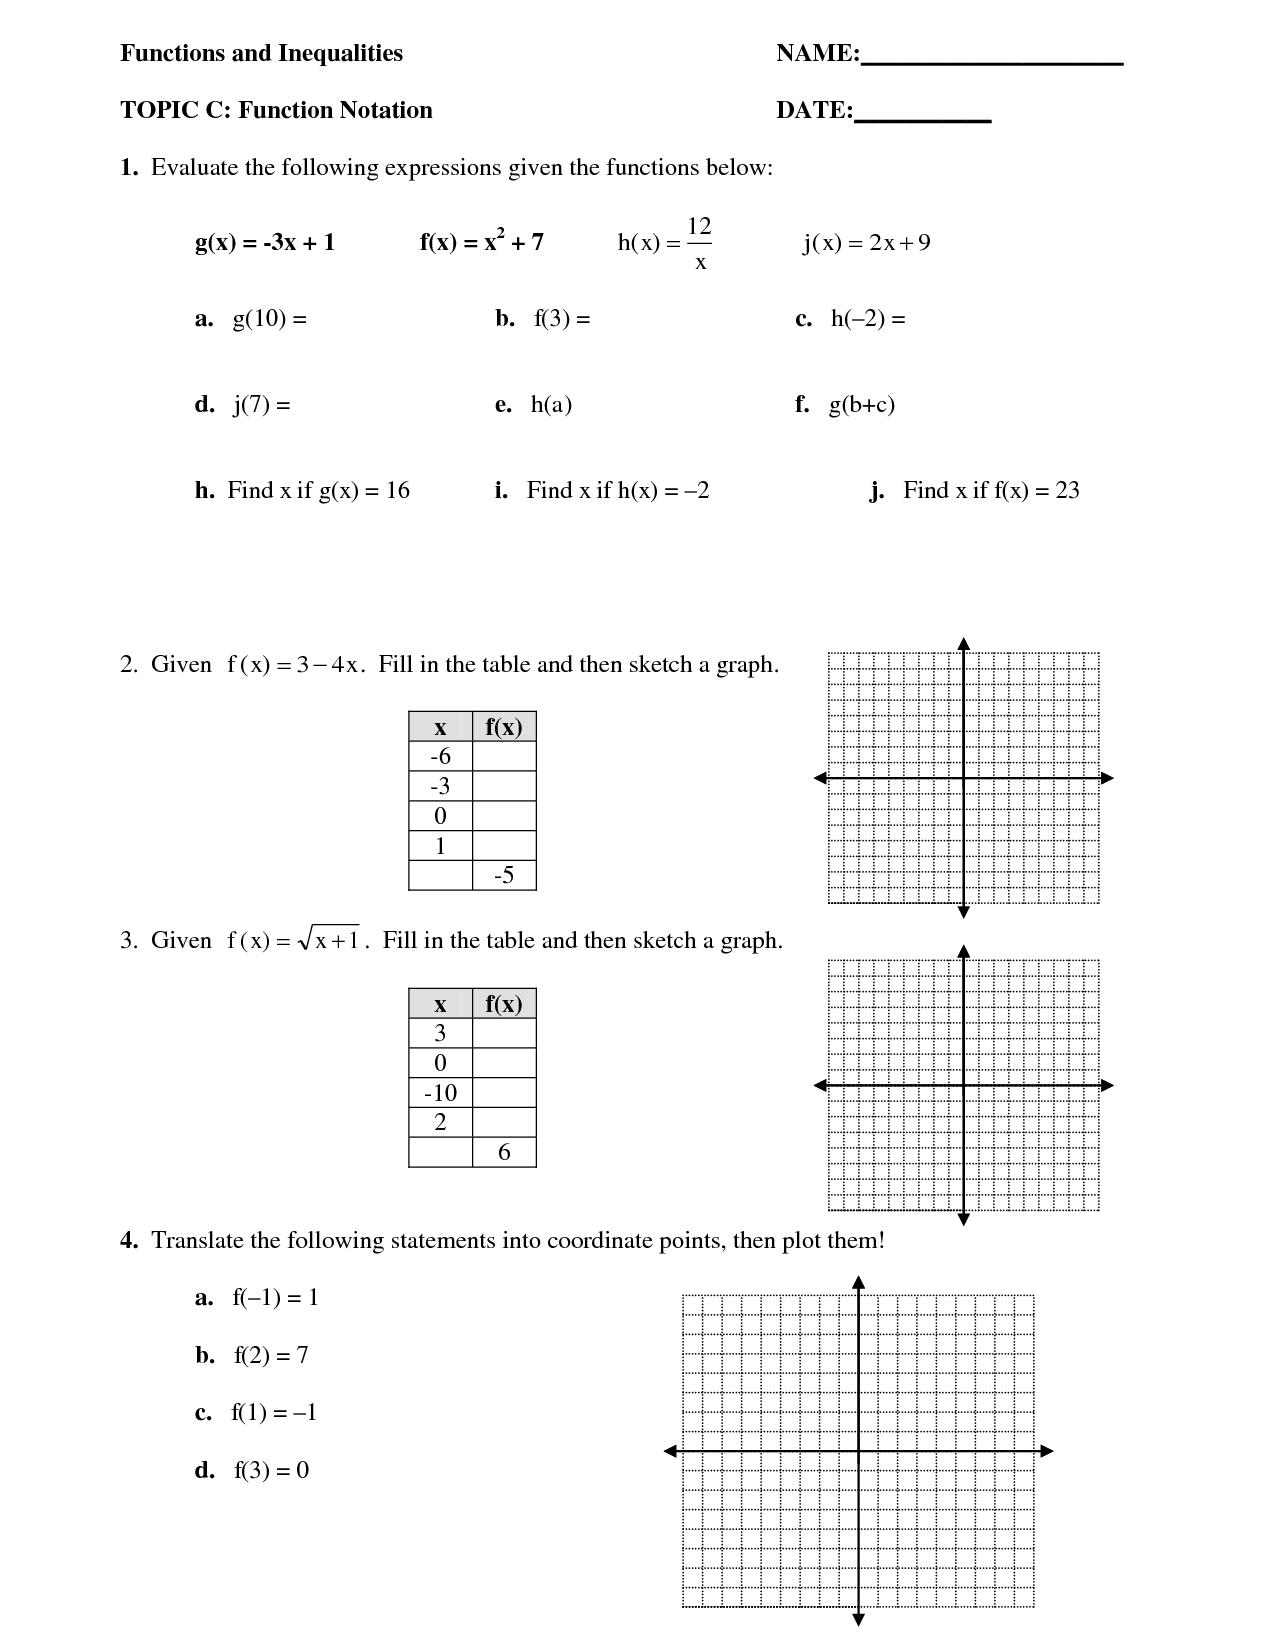 Function Notation And Evaluating Functions Practice Worksheet Answers